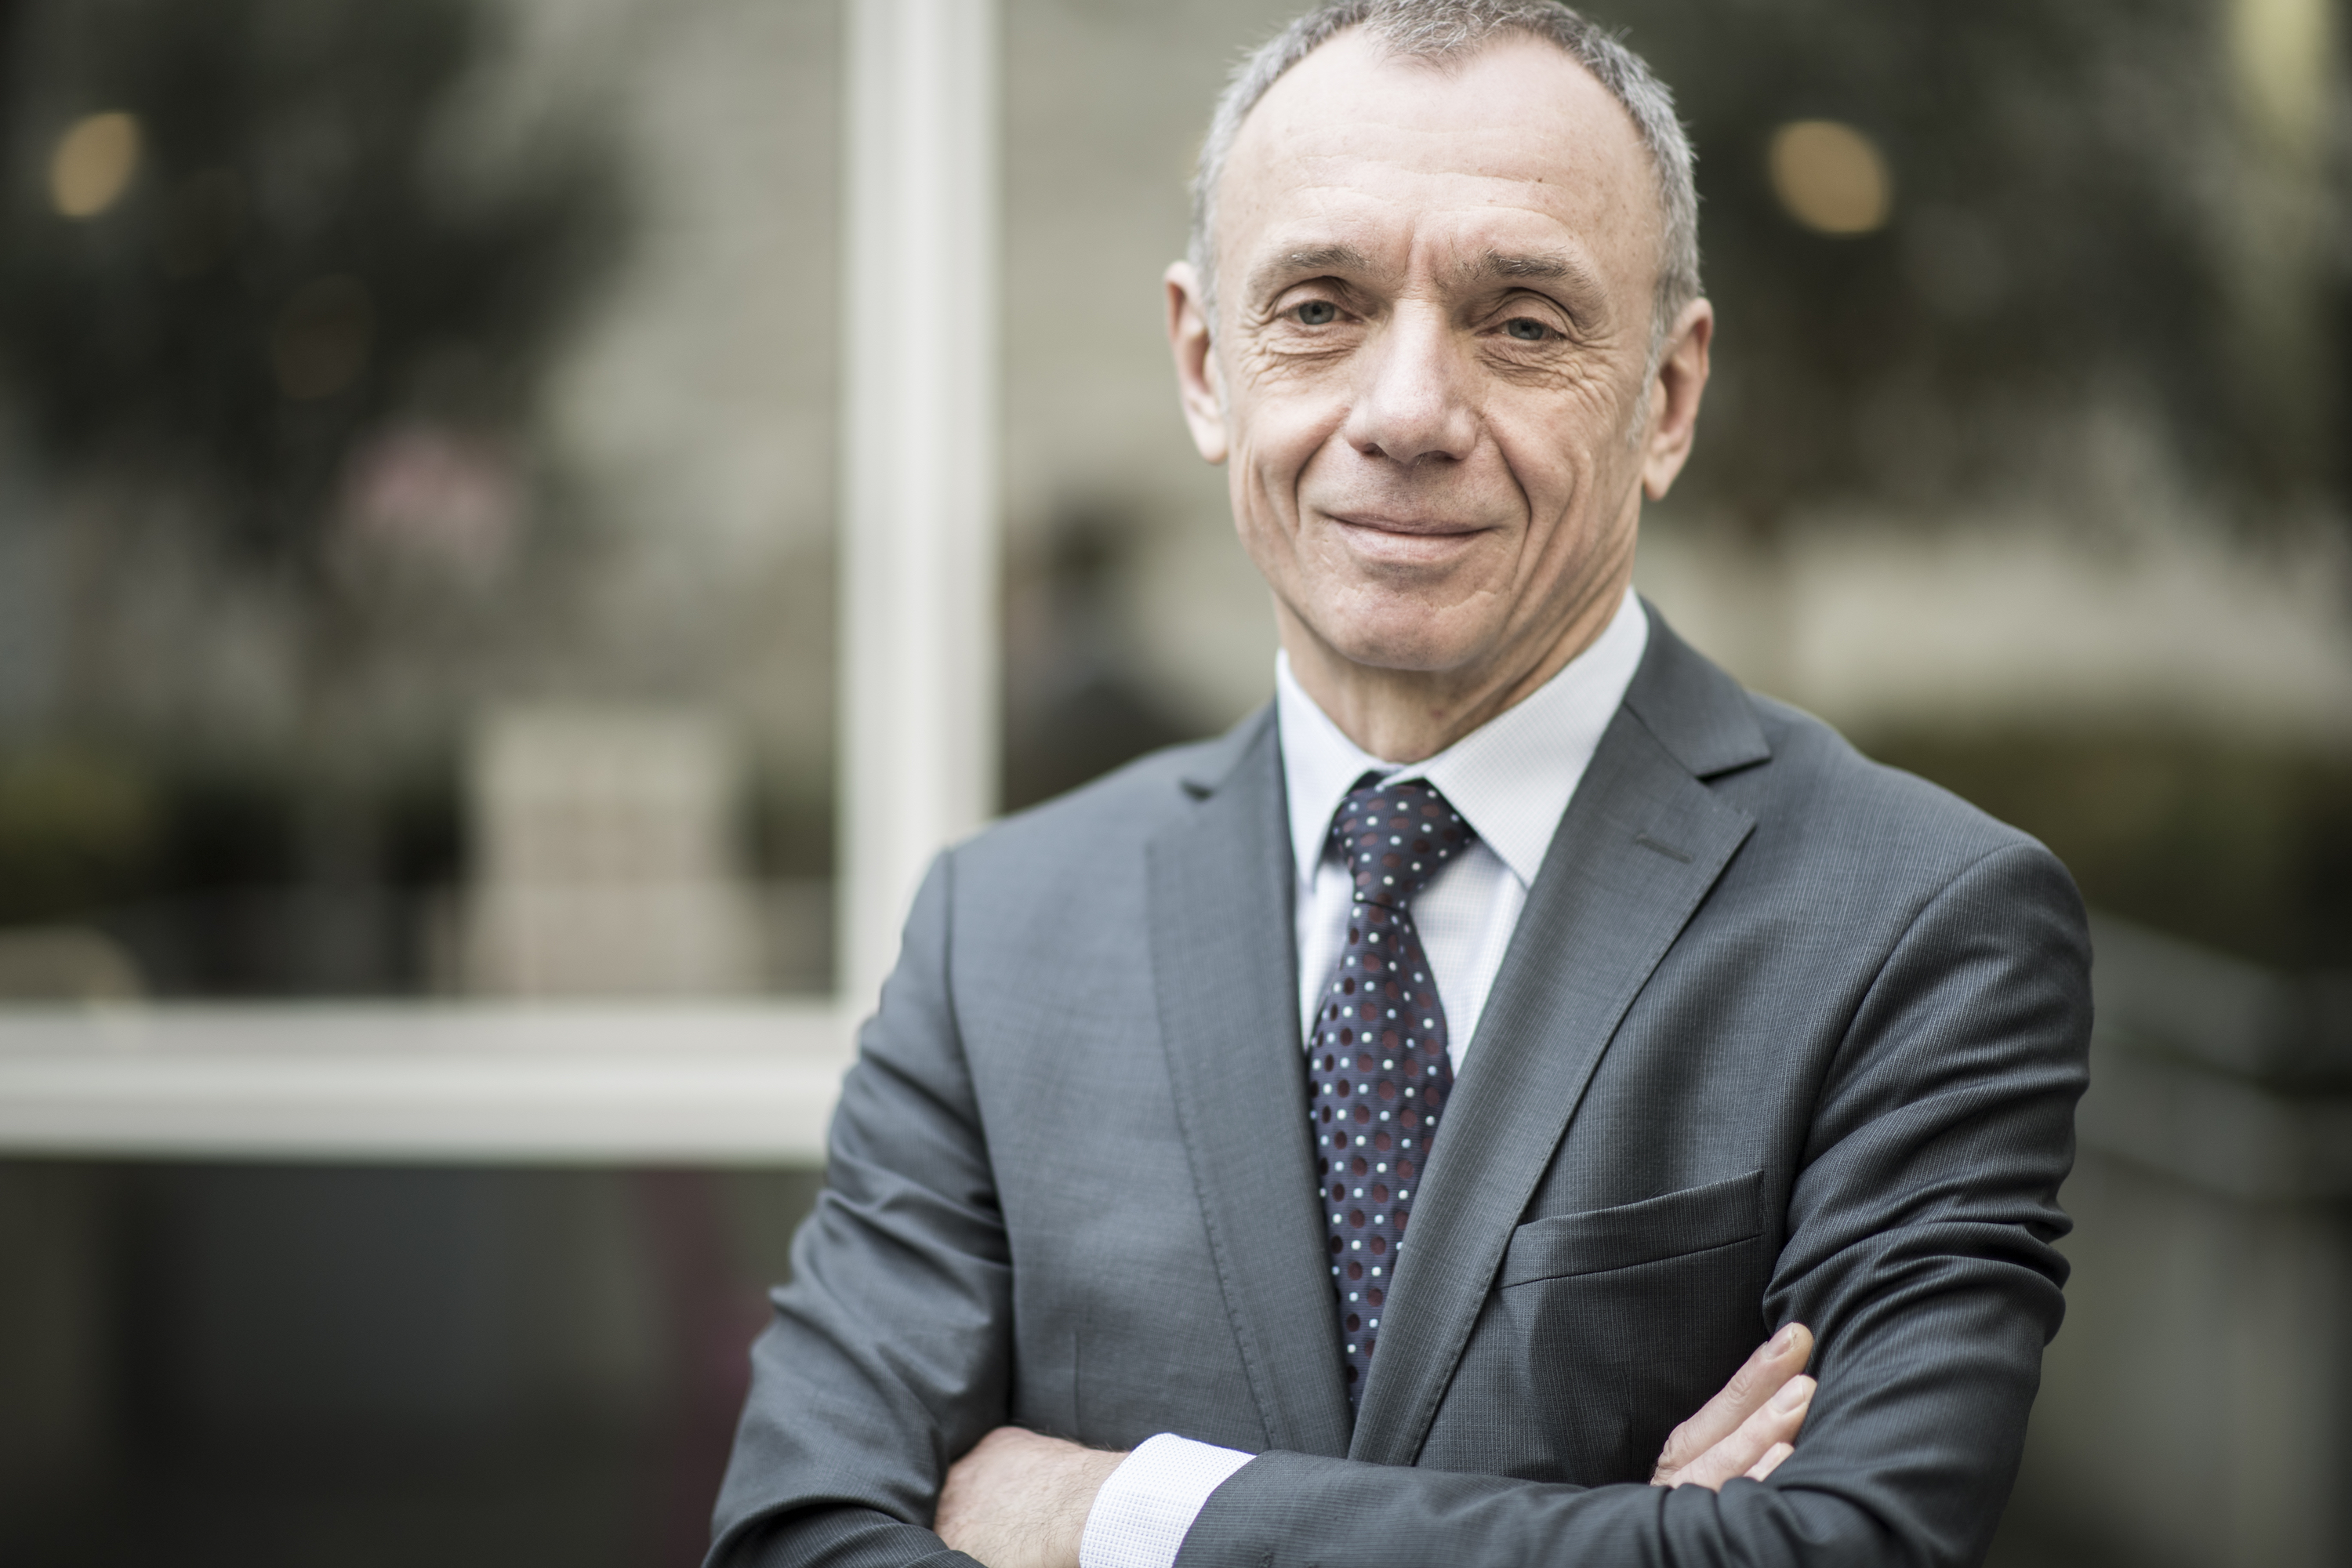 Alain Maingreaud to retain position of President of TFWA